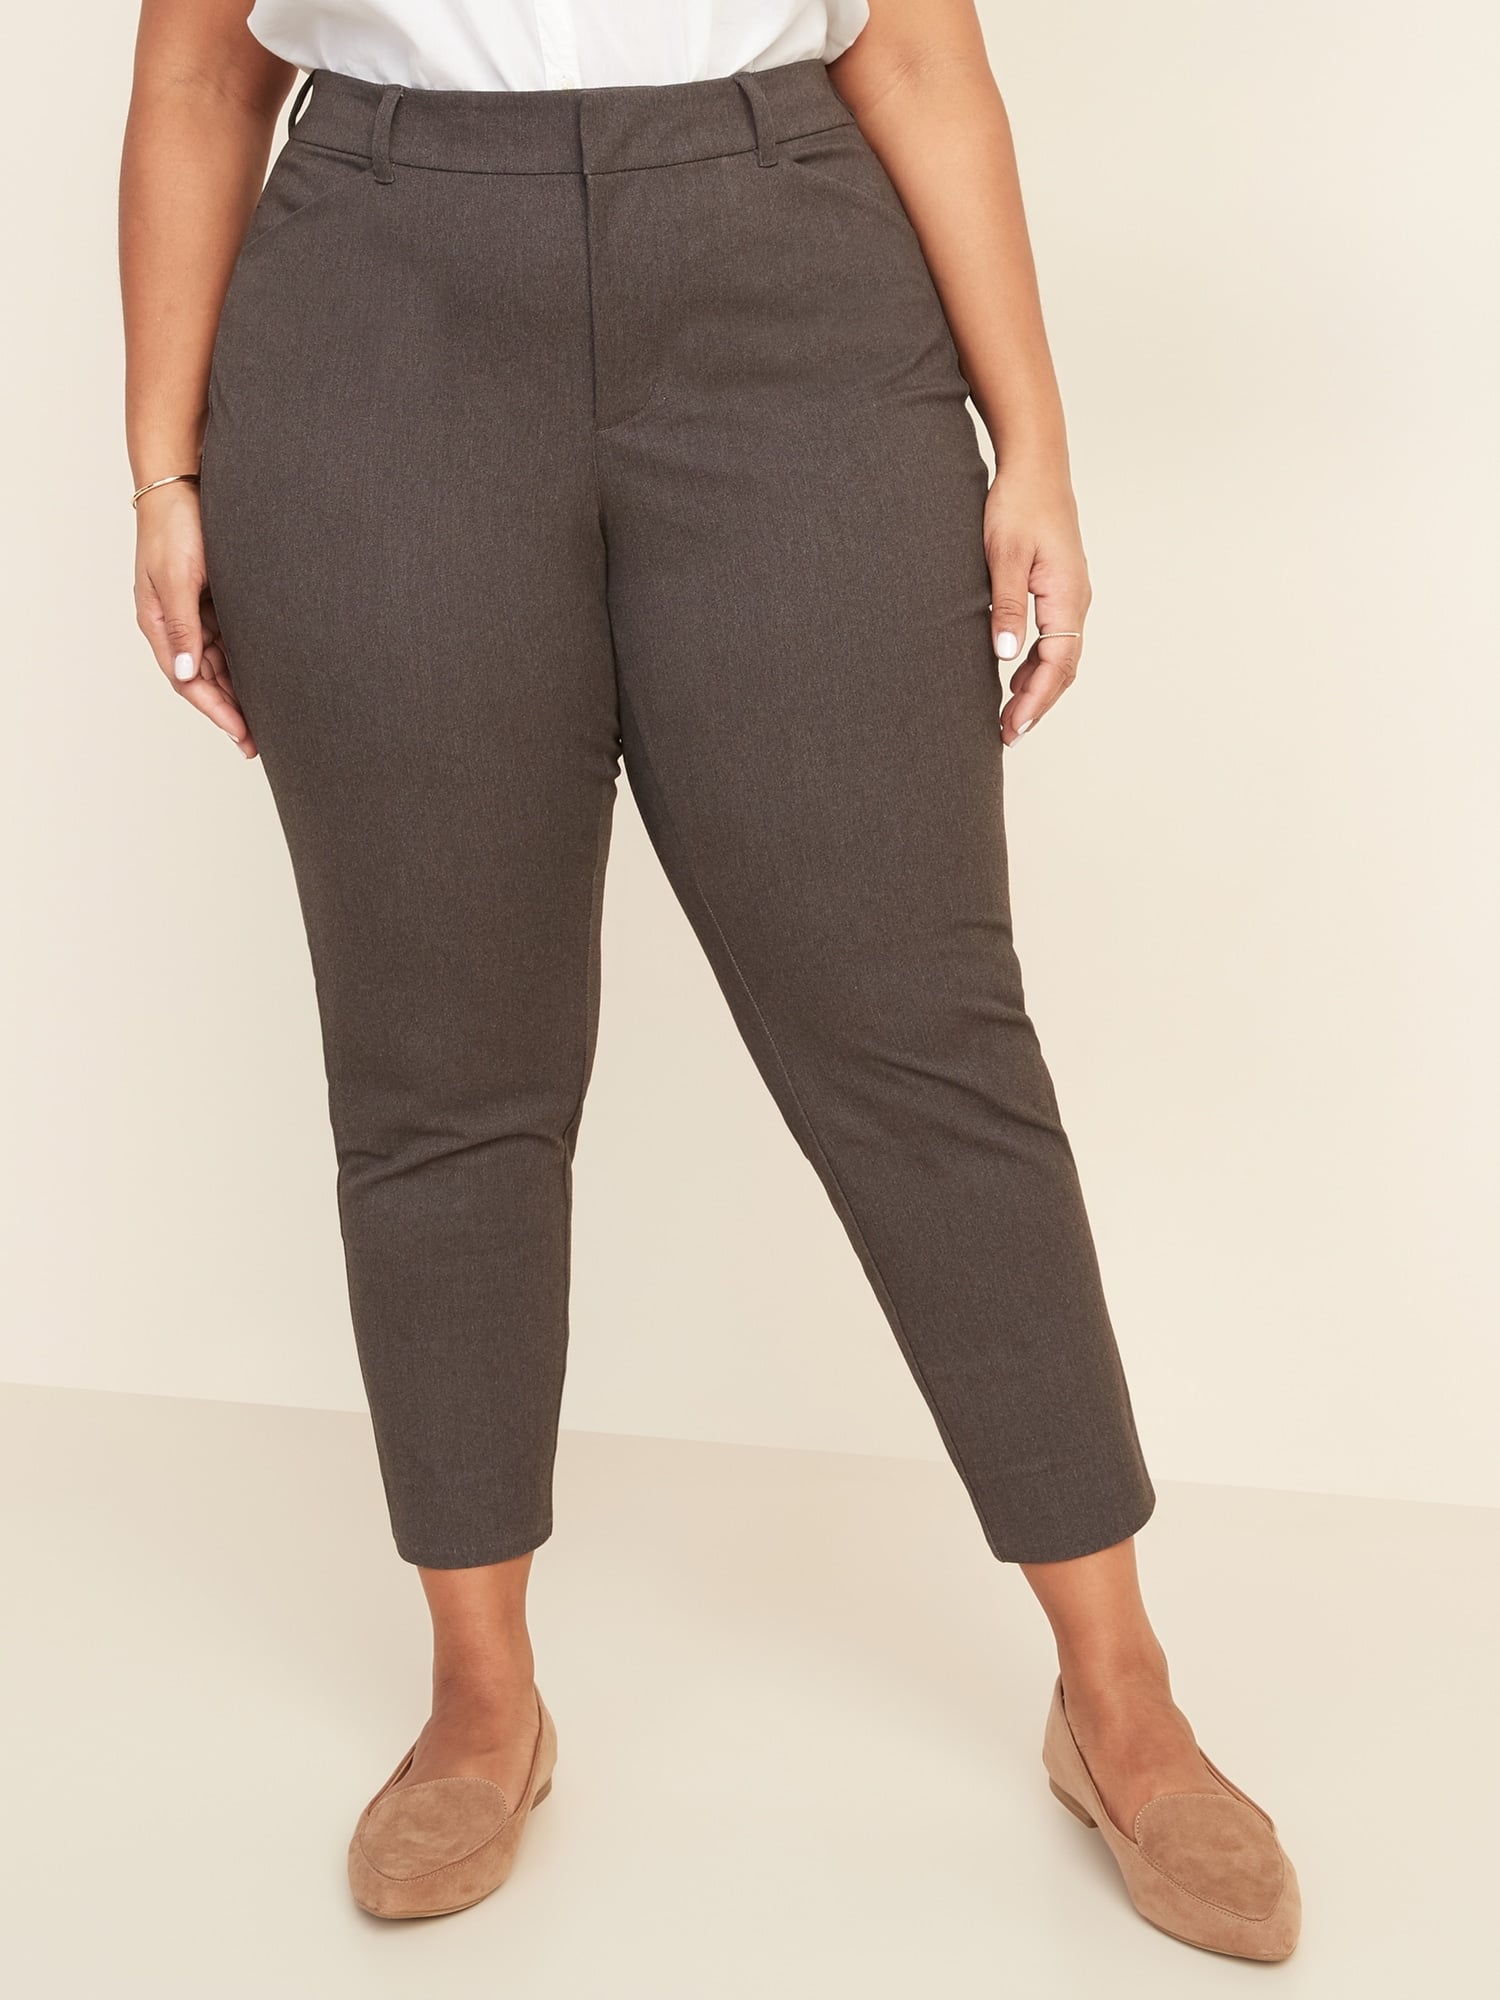 old navy pant sizes